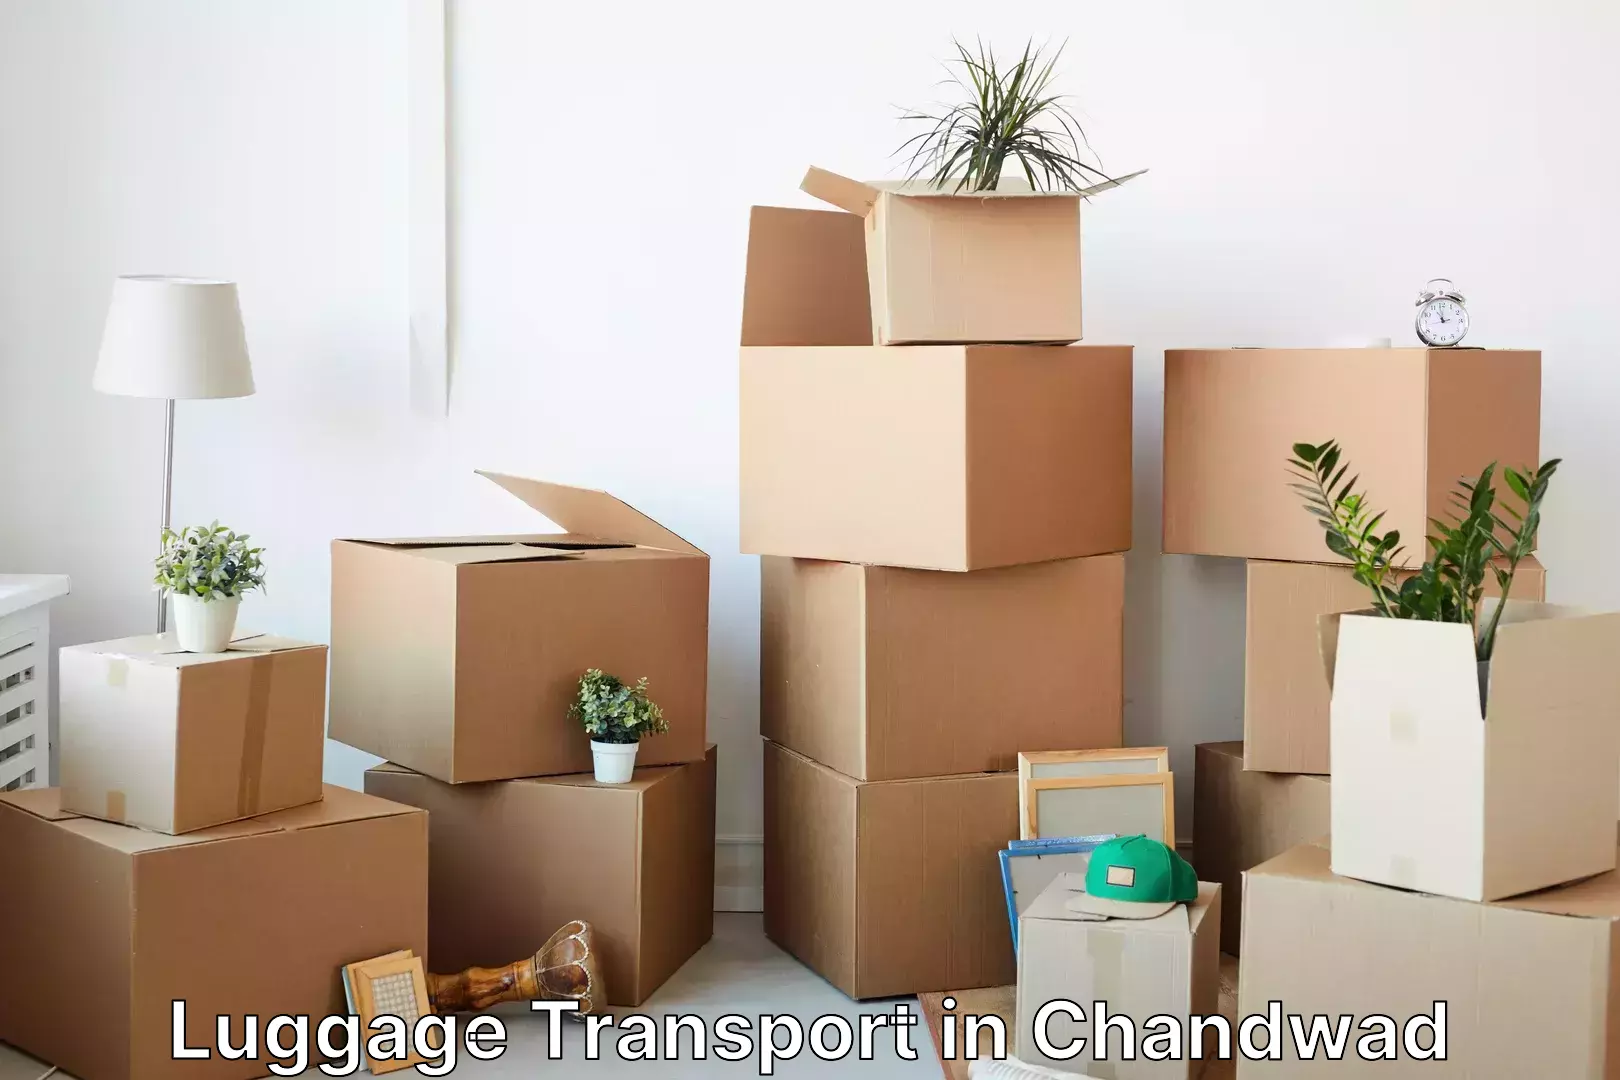 Group luggage shipping in Chandwad